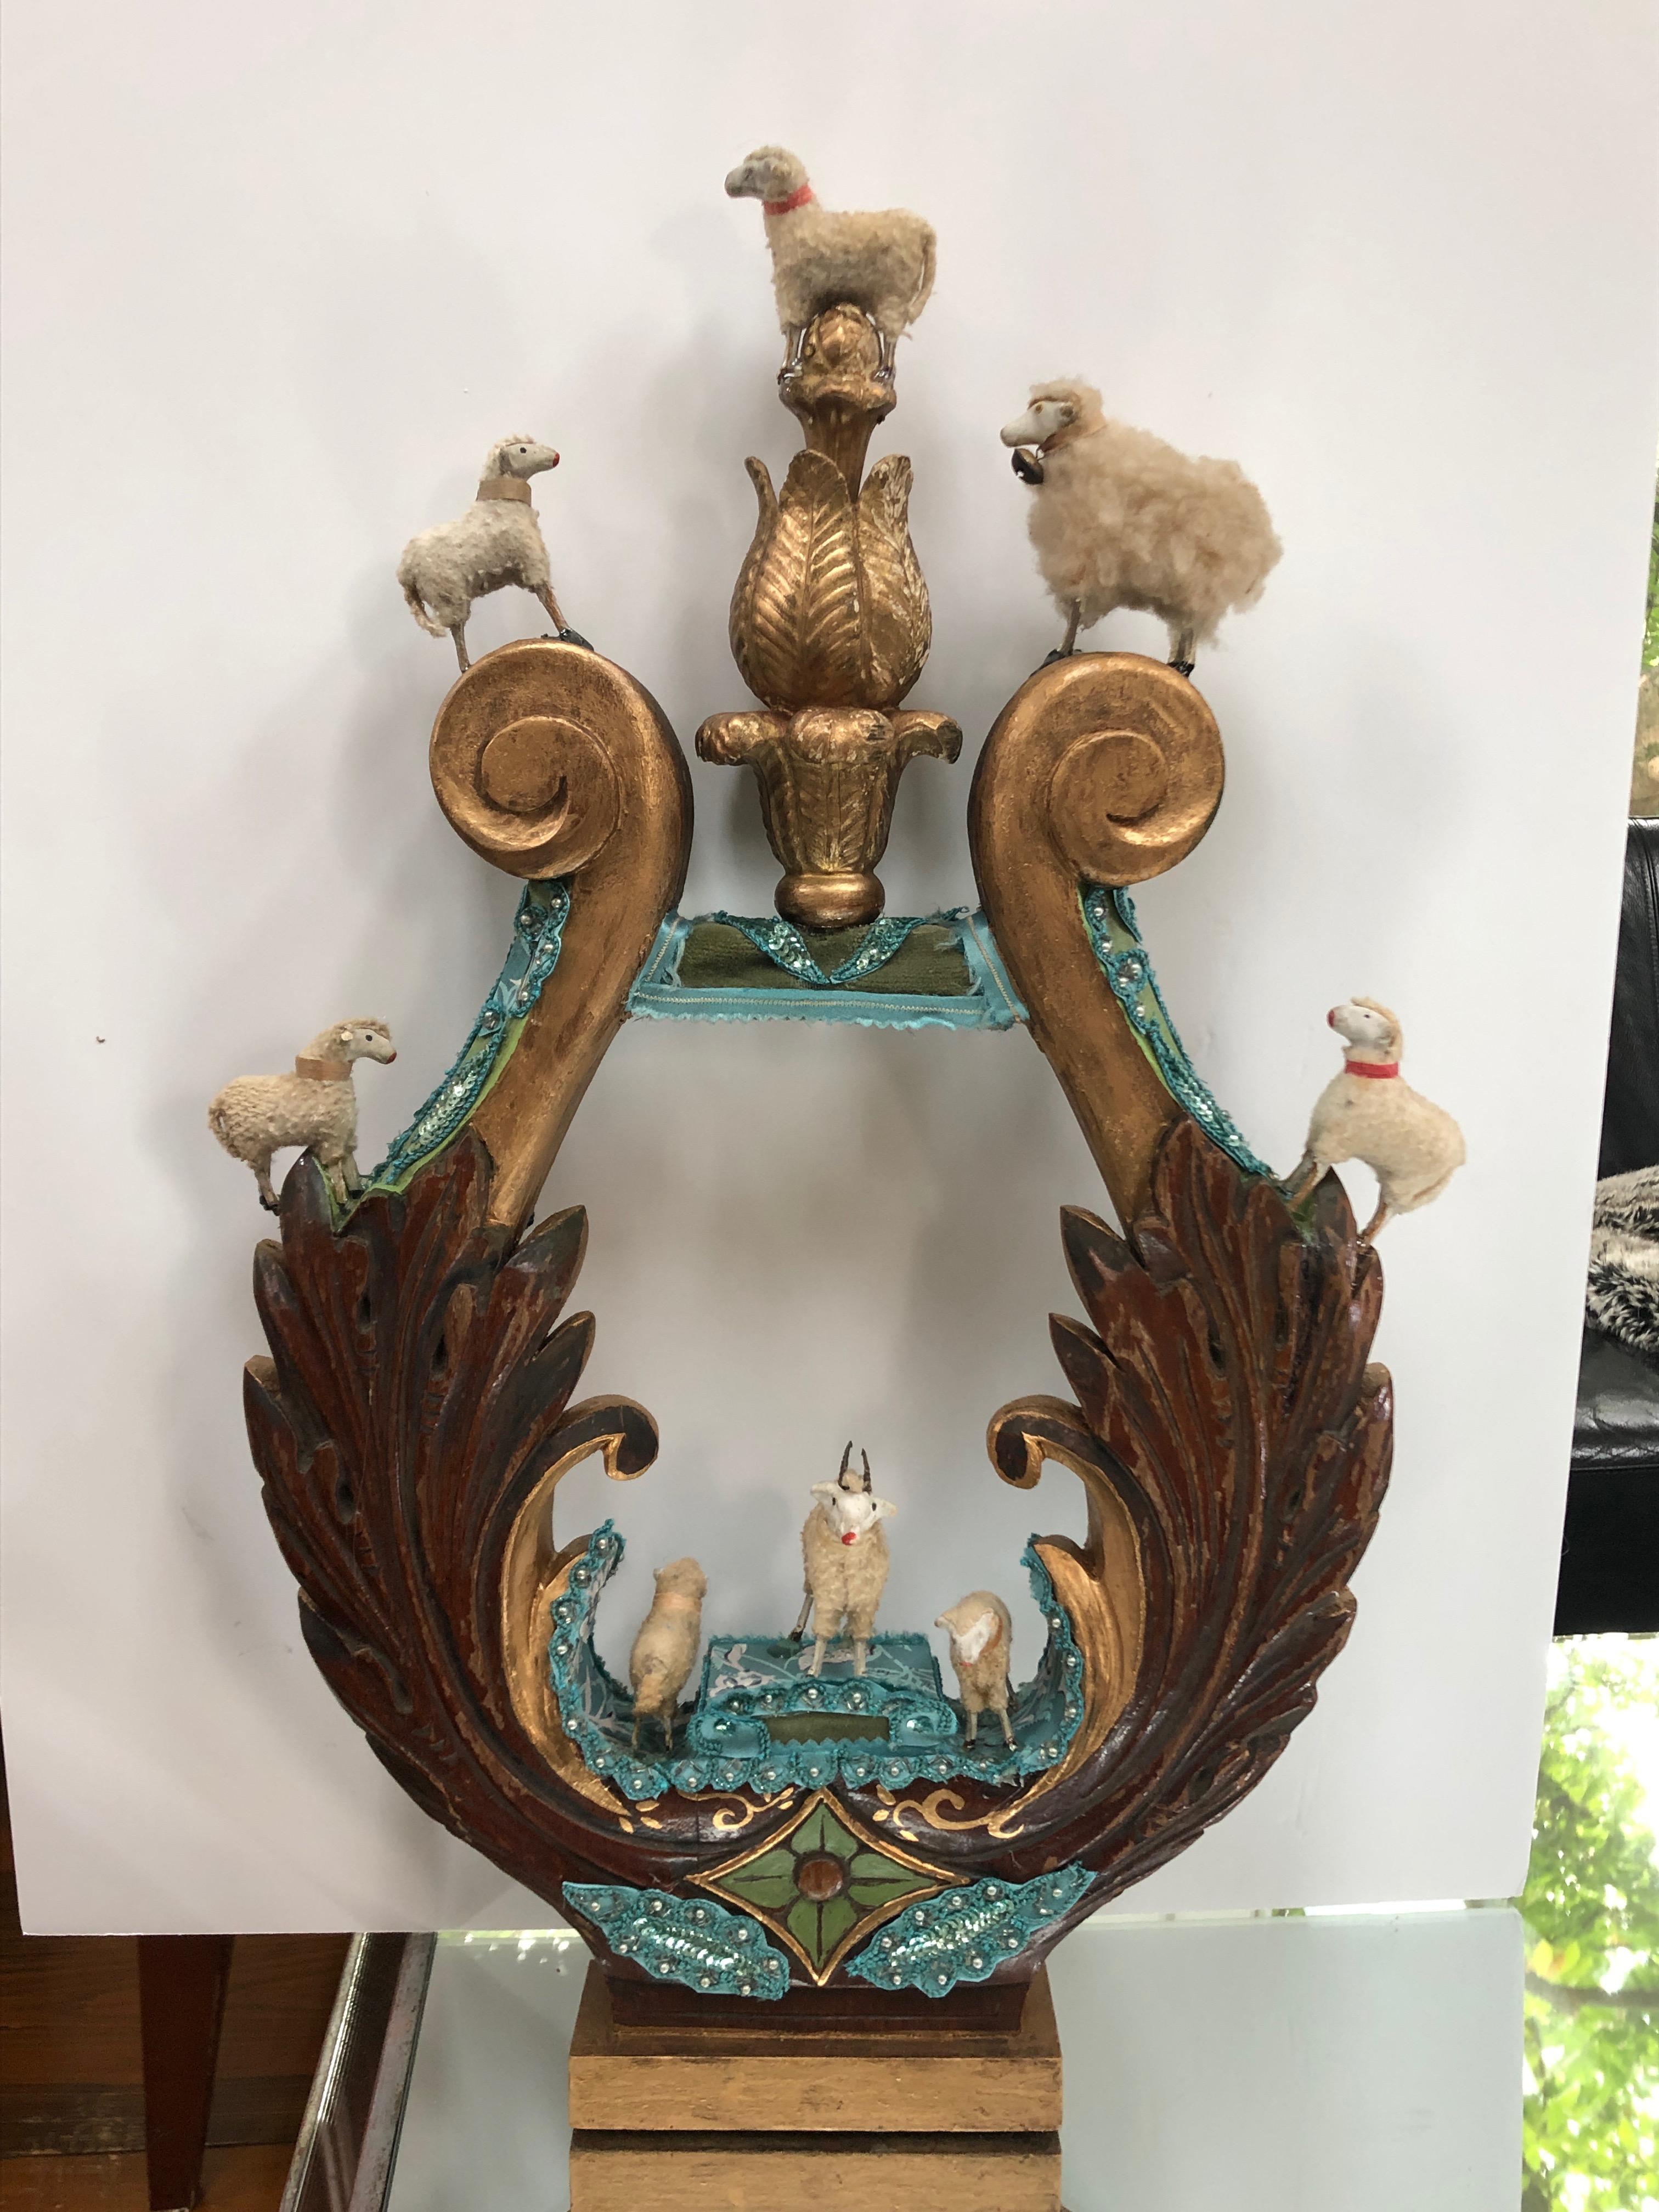 A charming imaginative sculpture created on a vintage carved wood fragment in the shape of a lyre, intricately adorned with European handmade antique lambs, an old finial, a mix of fabrics and hand painted by the renowned Princeton artist, Fay